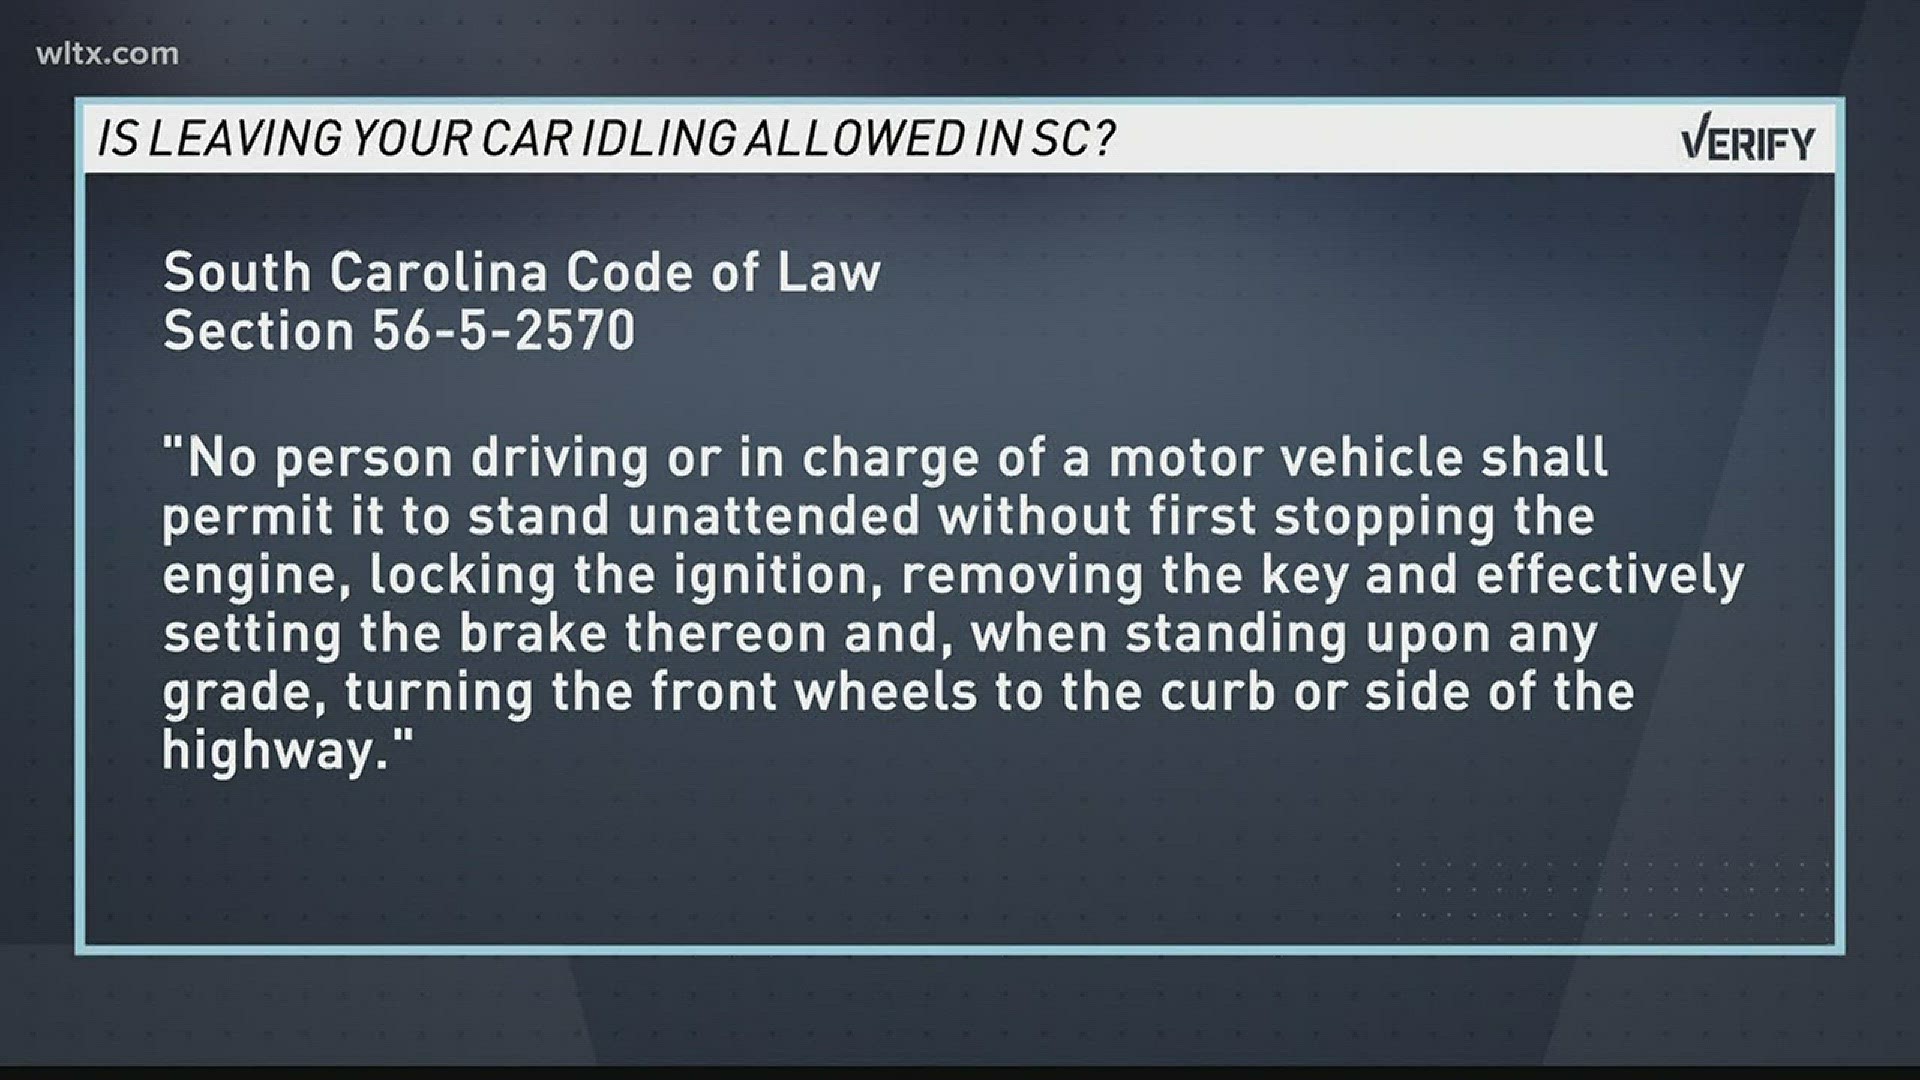 No one likes getting inside a freezing cold vehicle, so you may run out to start your car a few minutes before you head to school or work.	But is that legal in the state of South Carolina?